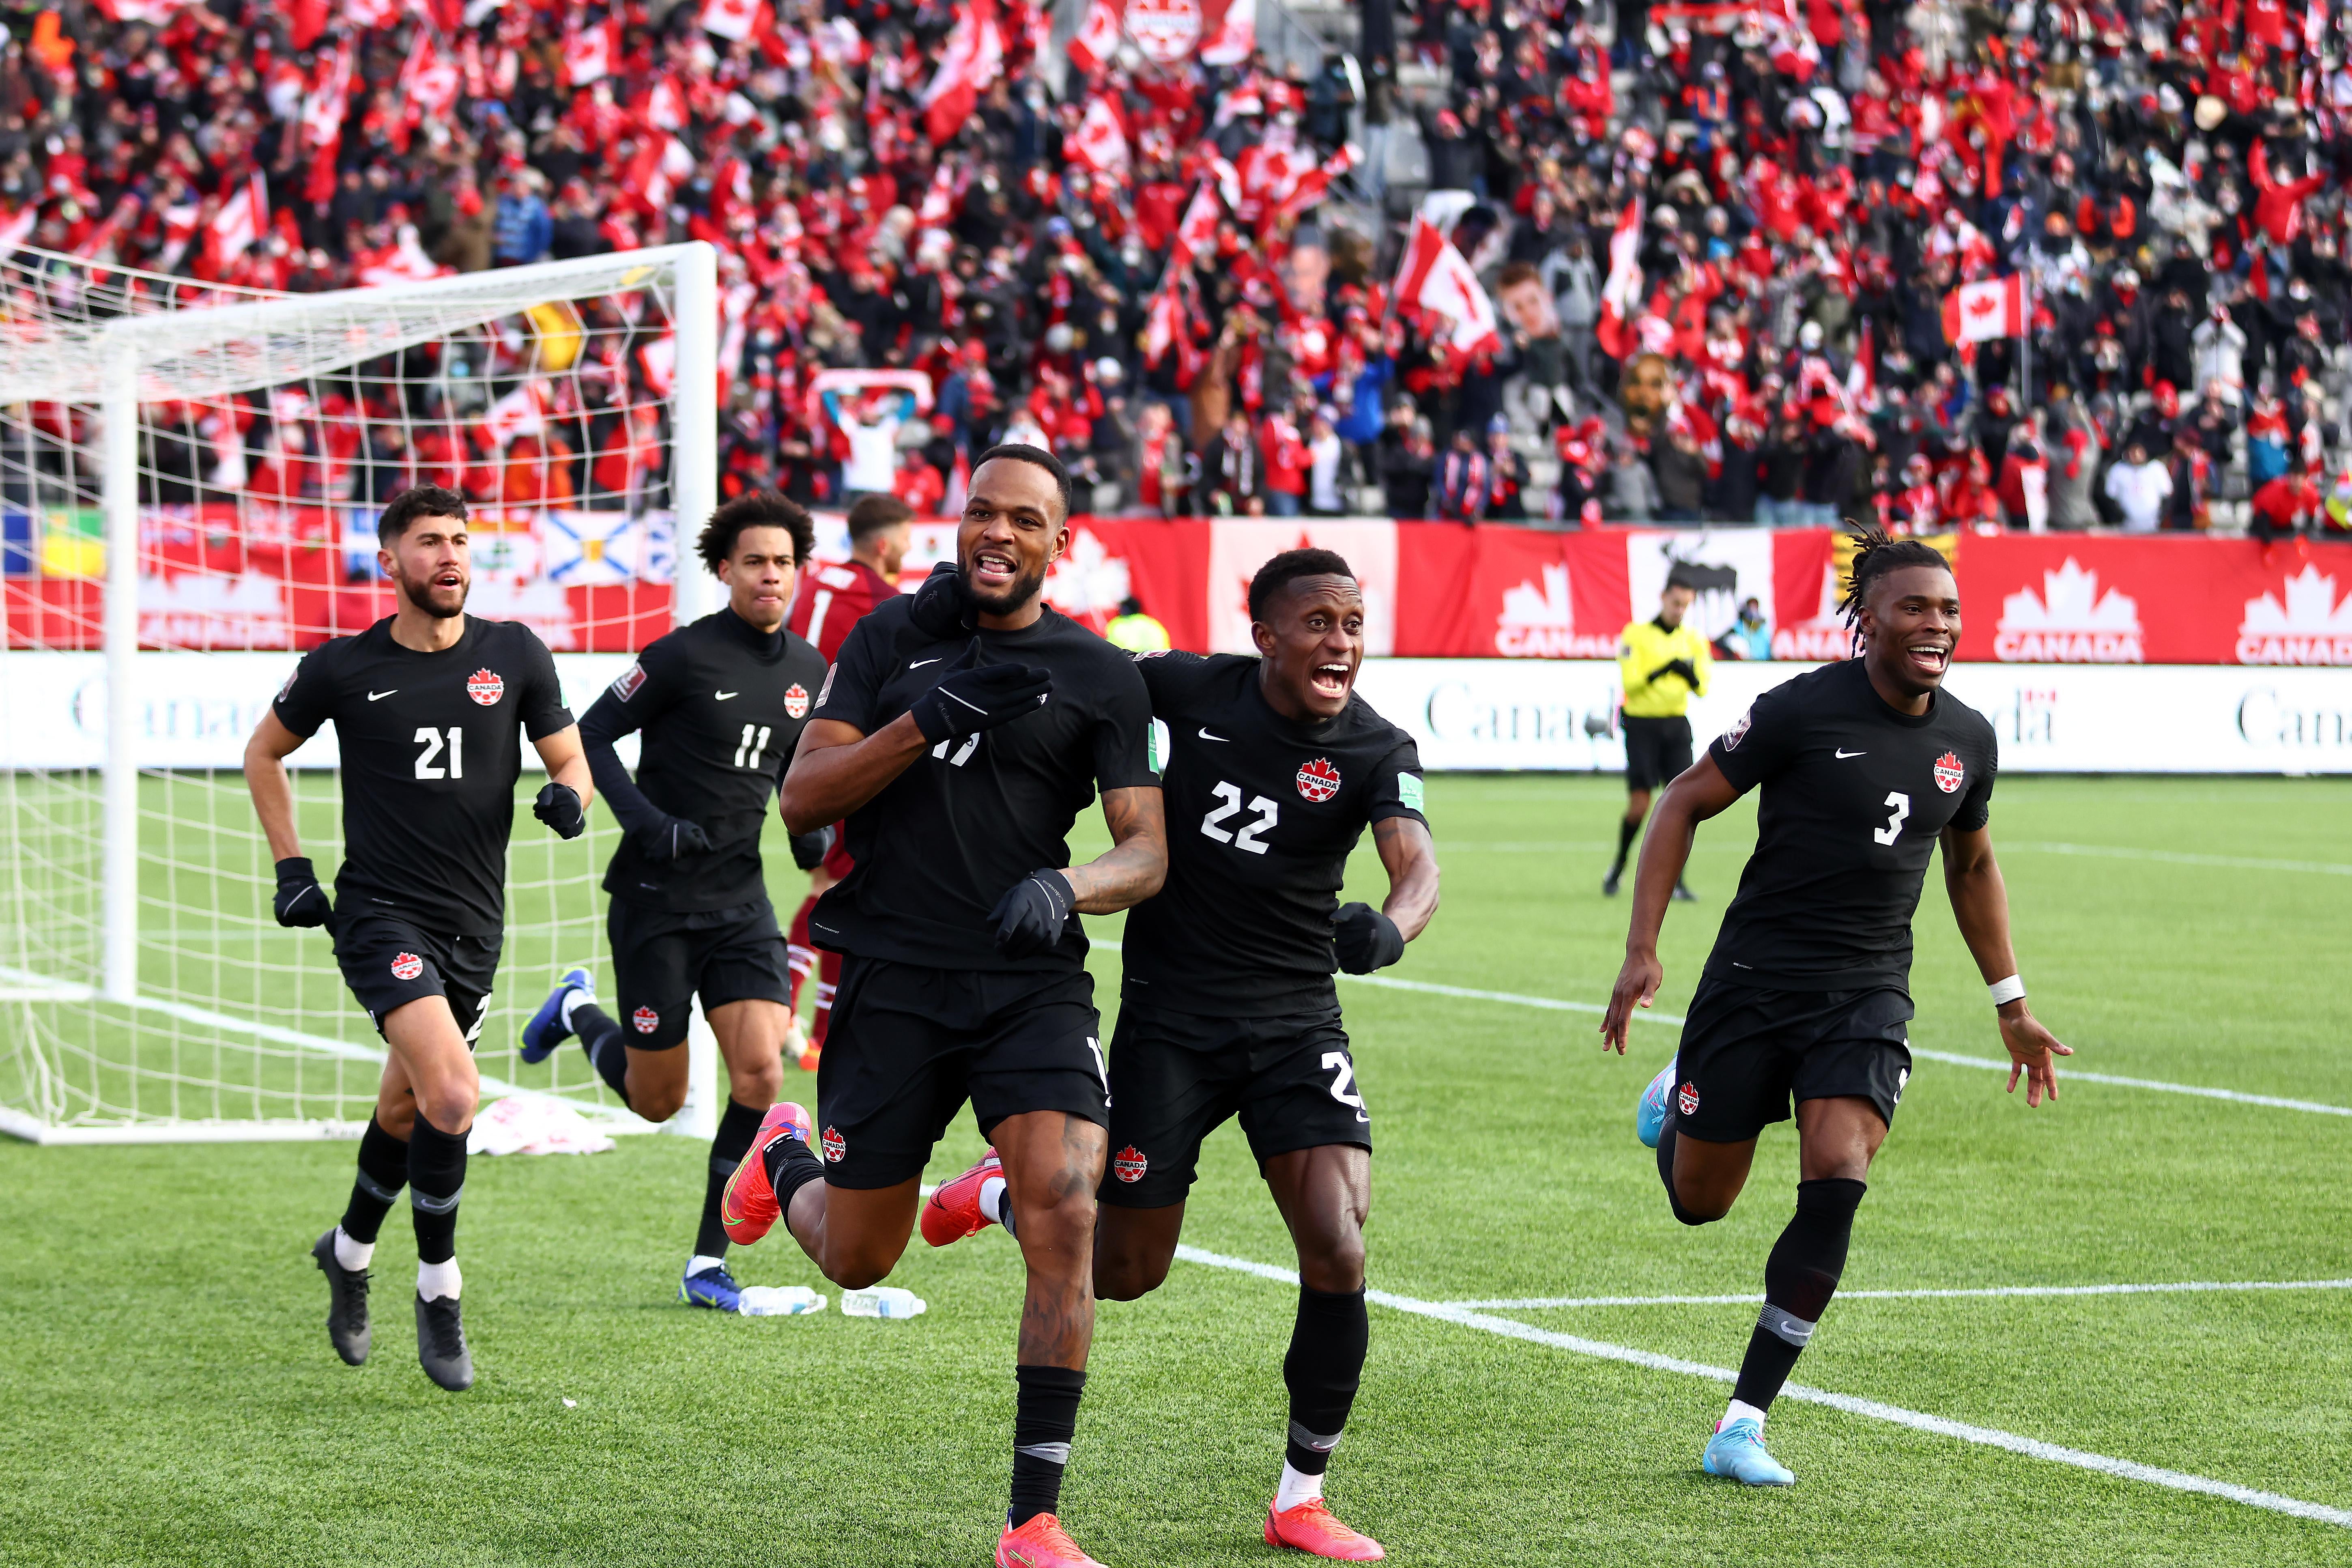 Larin, Laryea, and four other Canadian players run and cheer in front of the net, with the American goalie and ref on the field and Canadian fans waving maple leaf flags in the stands behind them